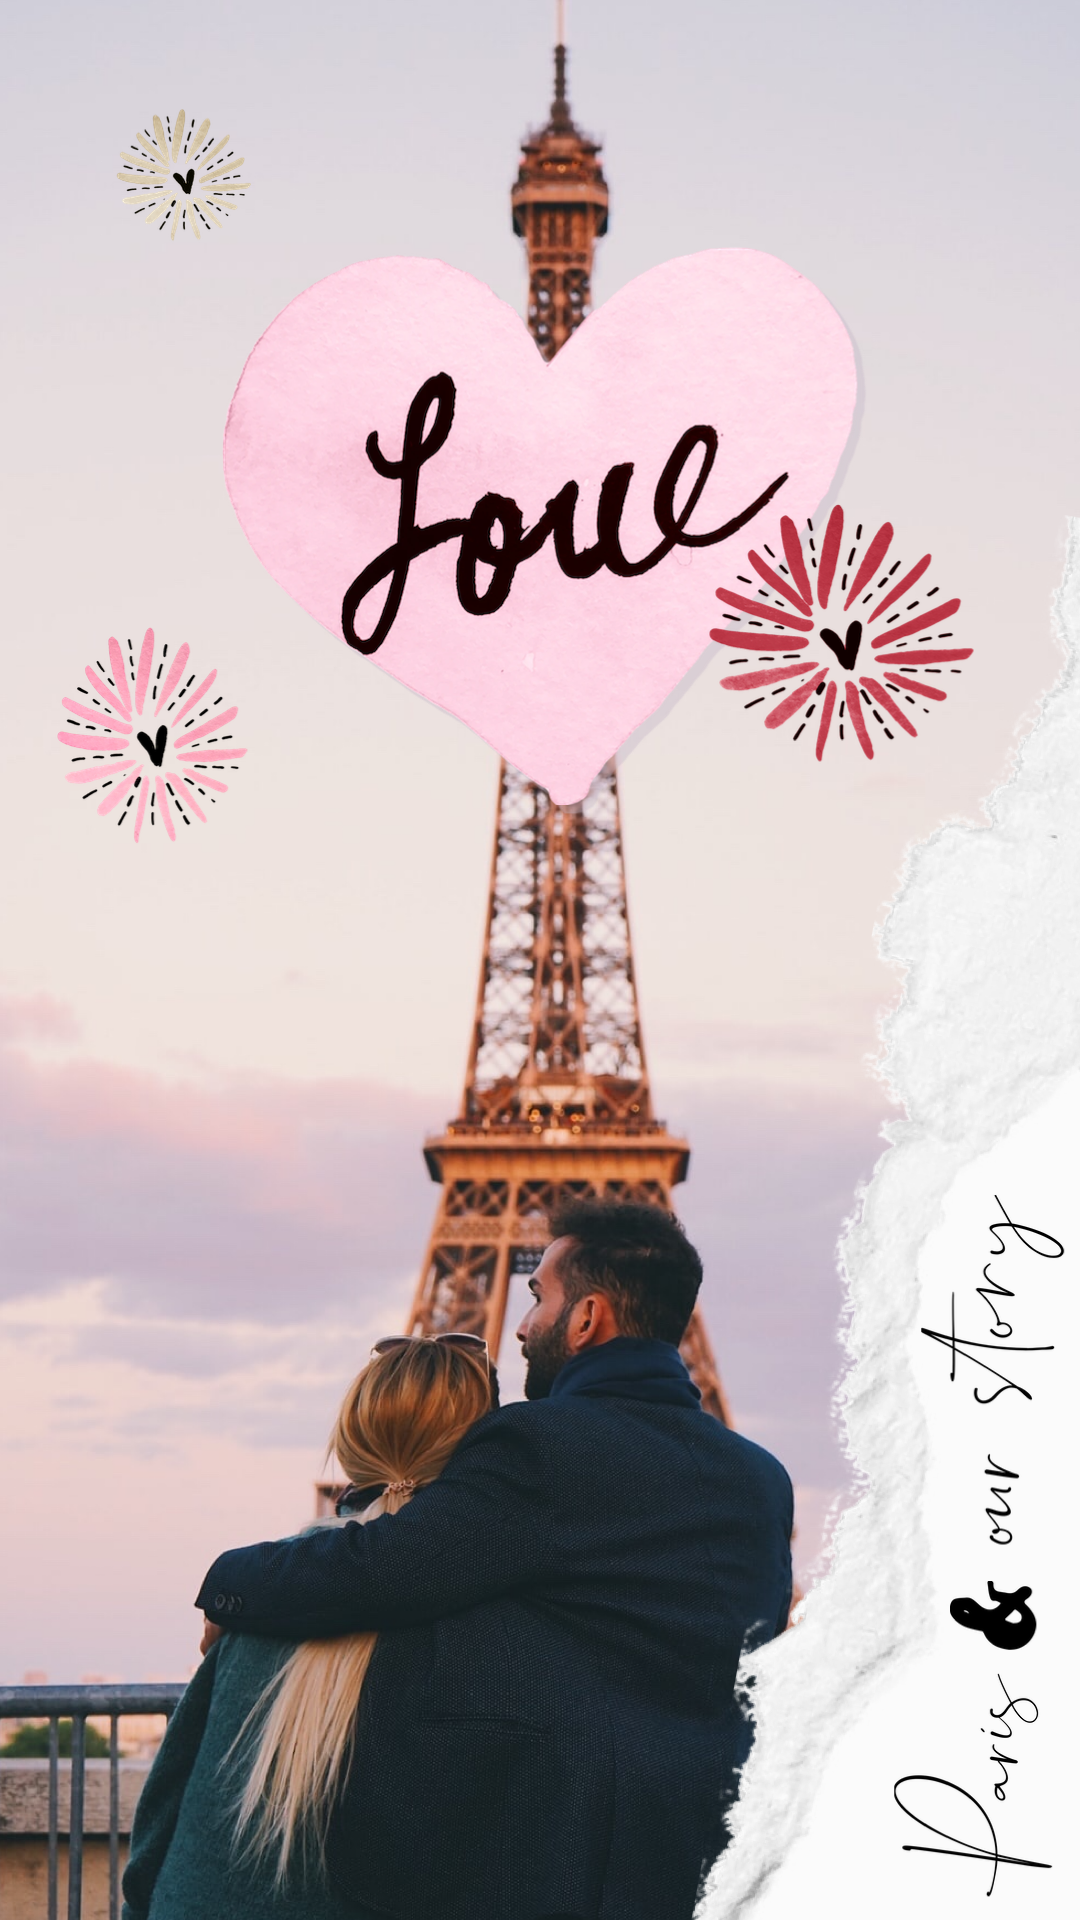 Man and woman in paris love story template